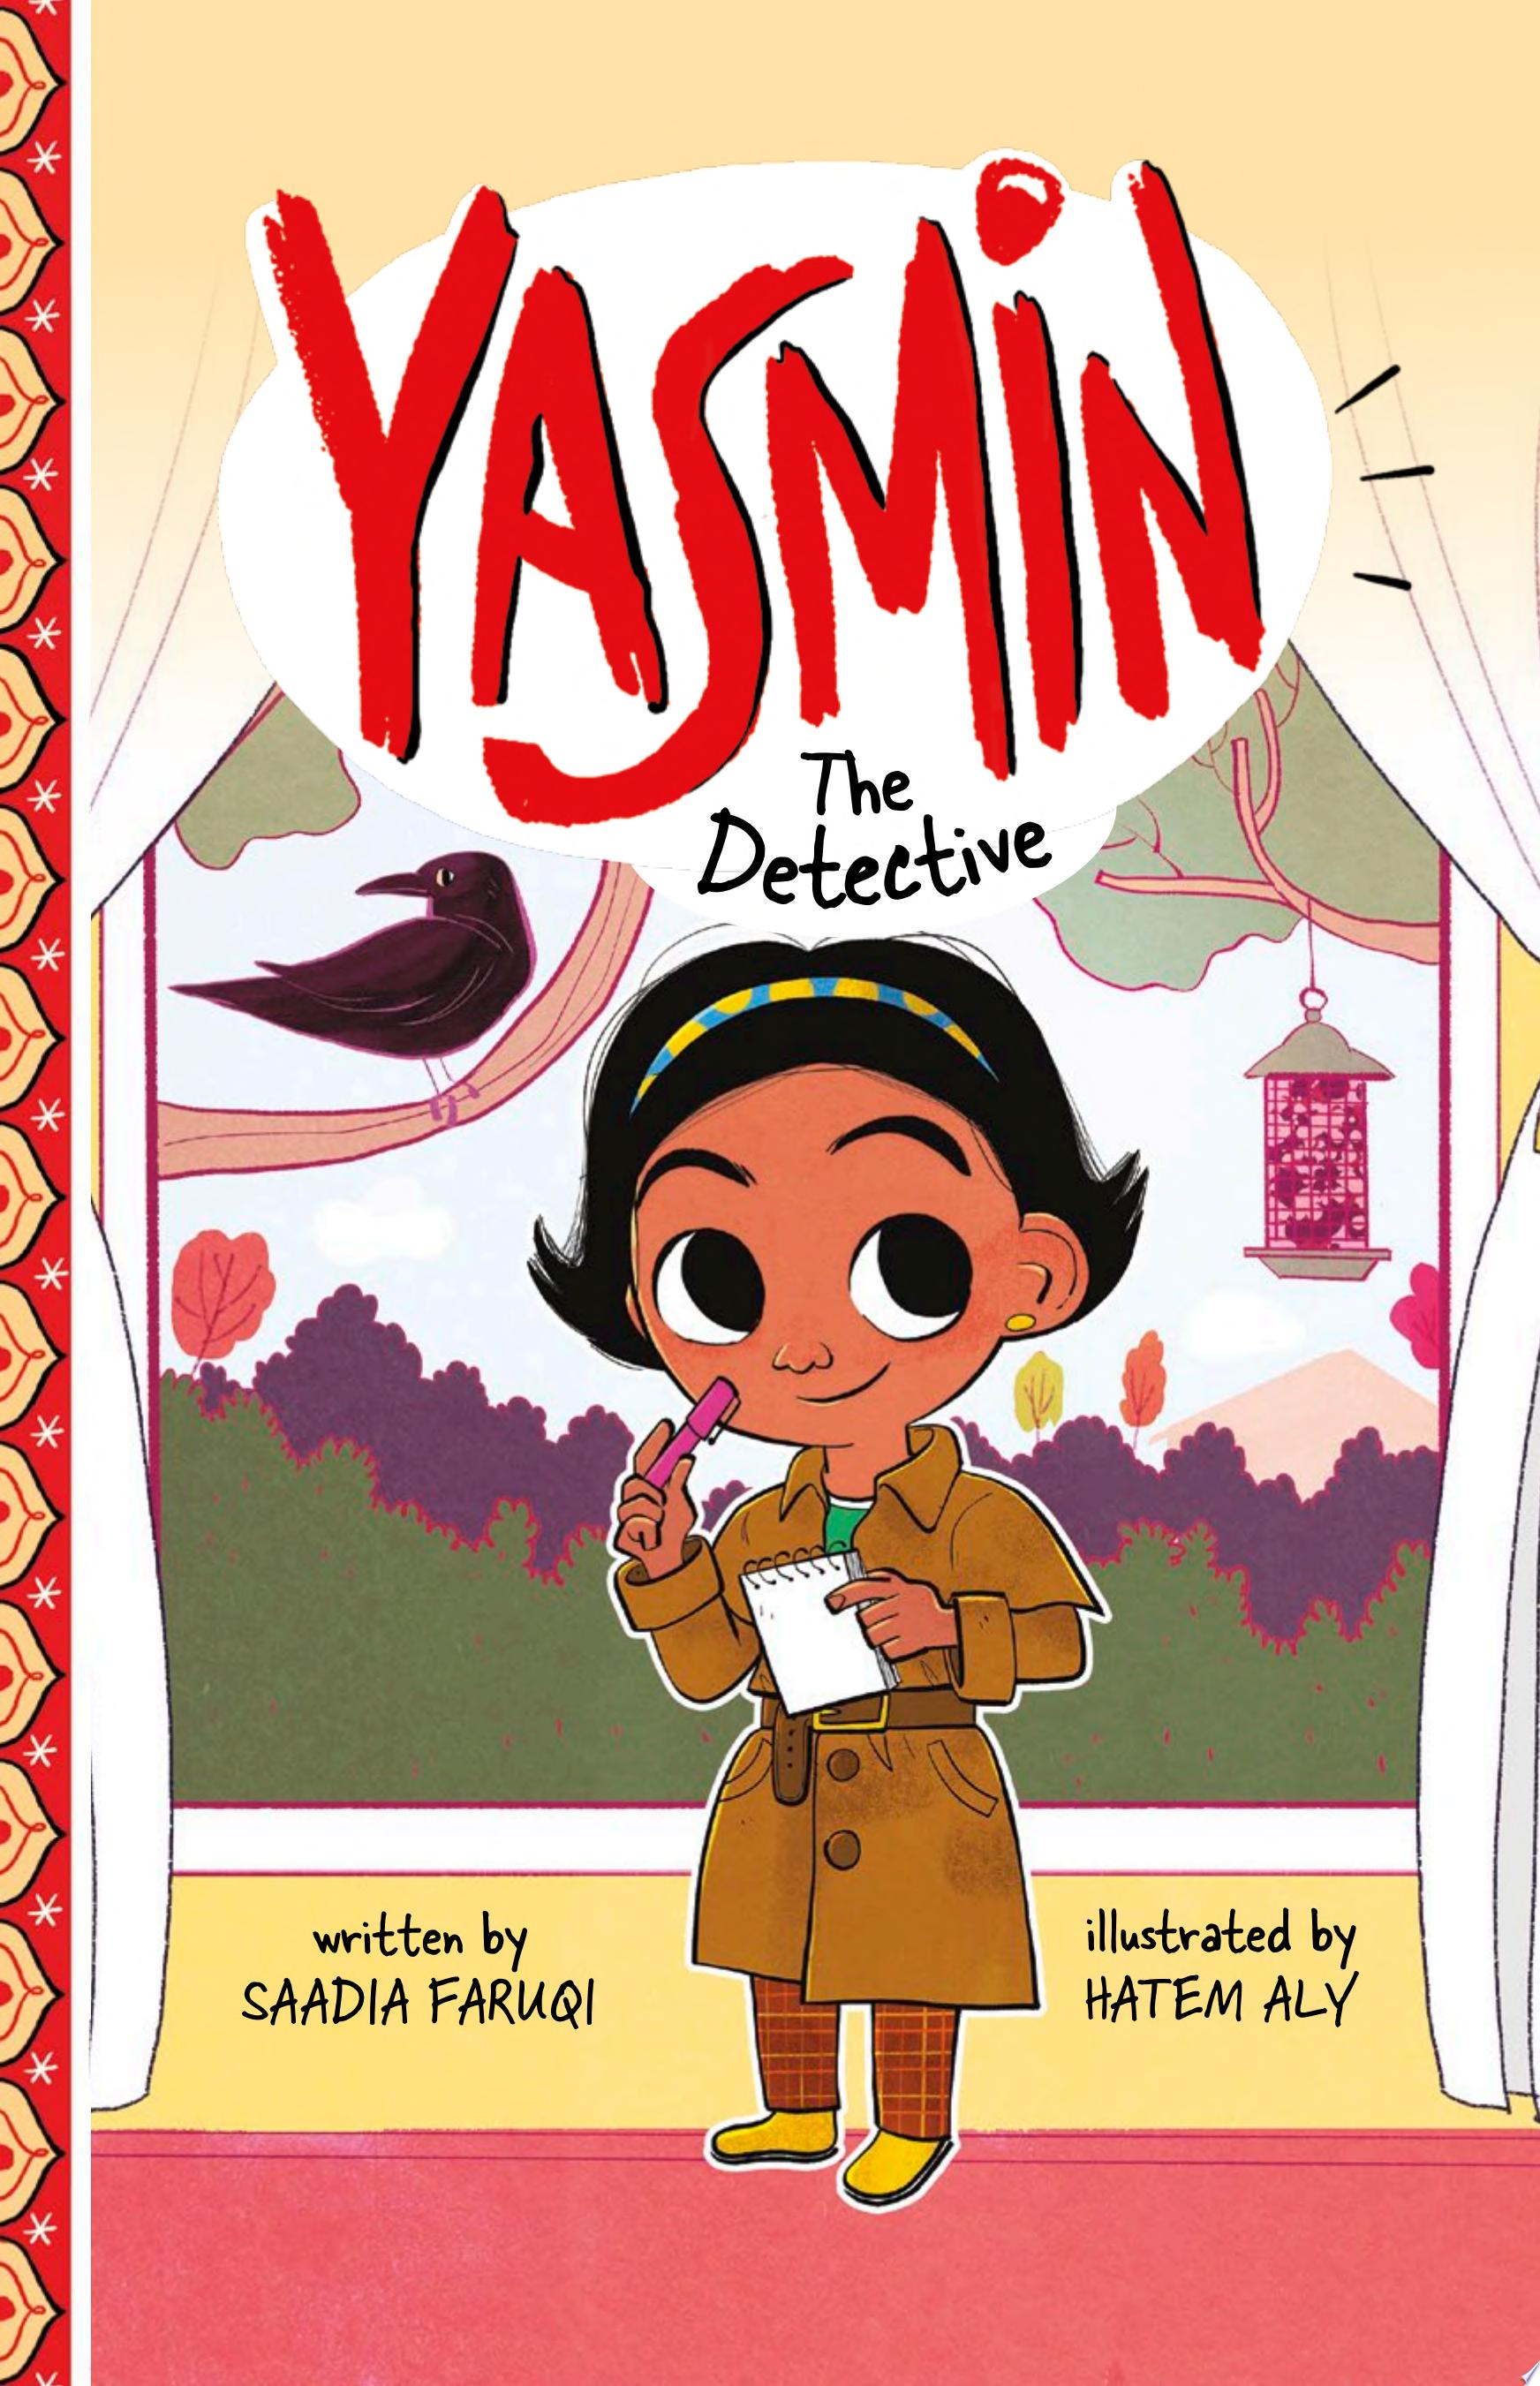 Image for "Yasmin the Detective"